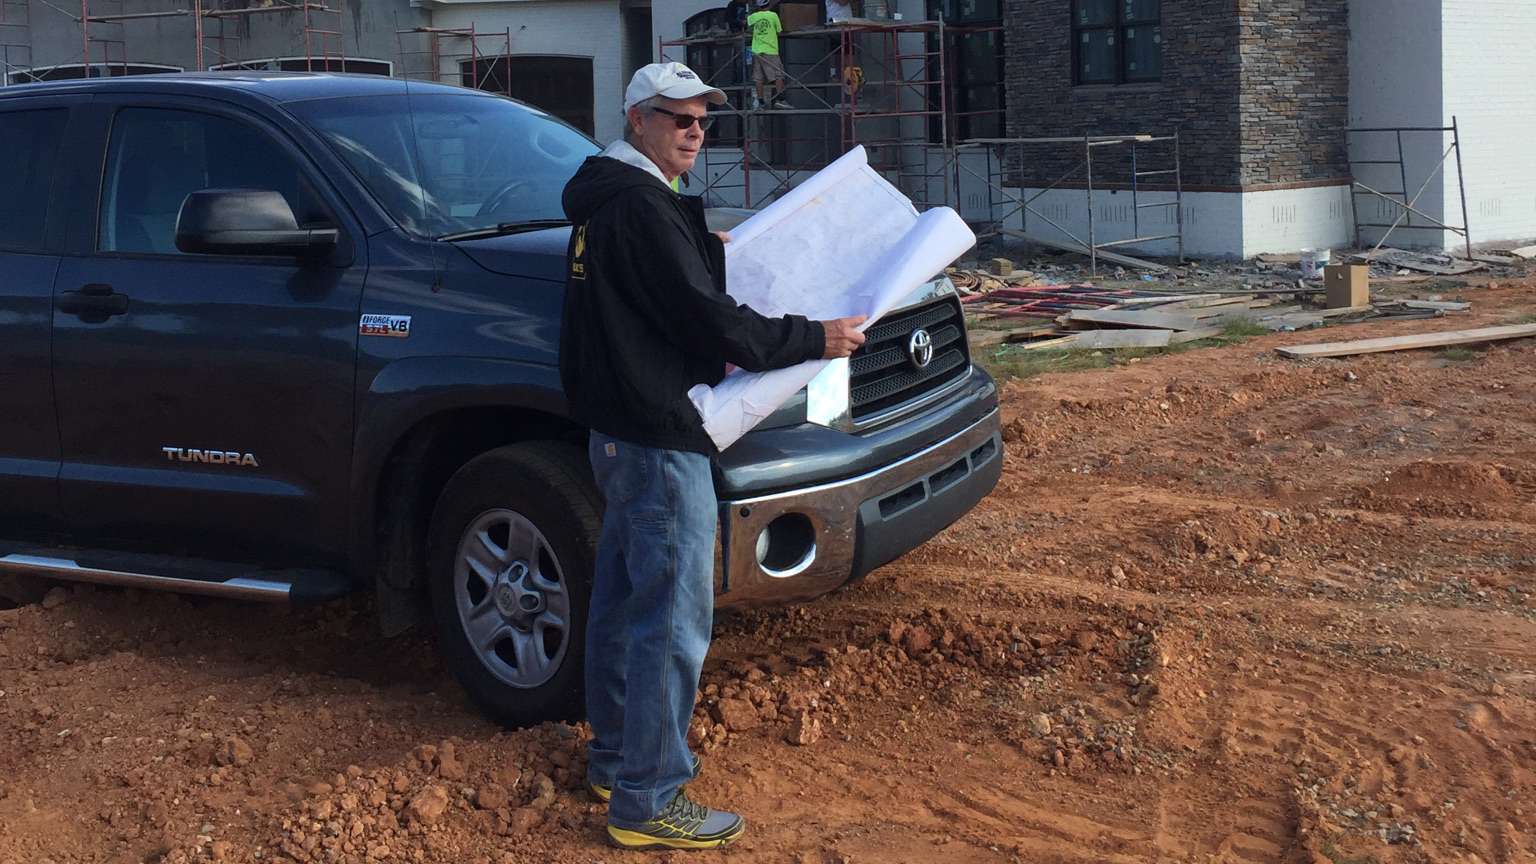 While his Toyota Sequoia joins him on the tournament trail, George's Tundra works with him on the job site. He uses it to pull heavy machinery like his 5,500 pound bobcat. 